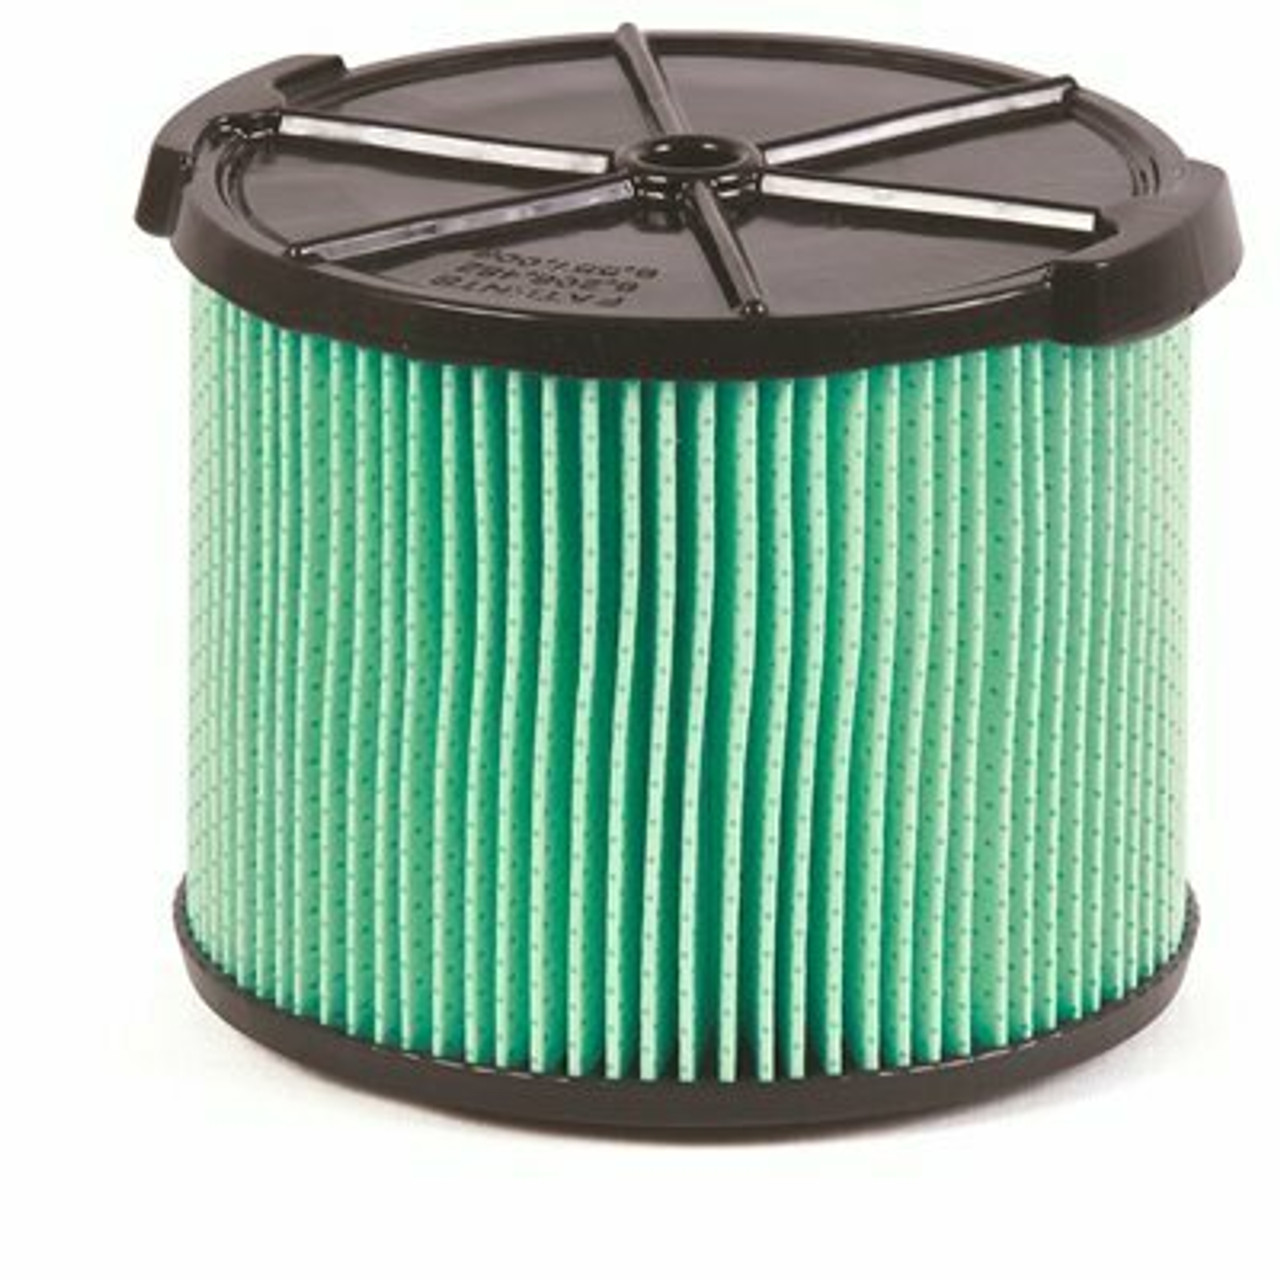 Ridgid 5-Layer Hepa Material Pleated Paper Filter For 3 To 4.5 Gal. Ridgid Wet/Dry Shop Vacuums